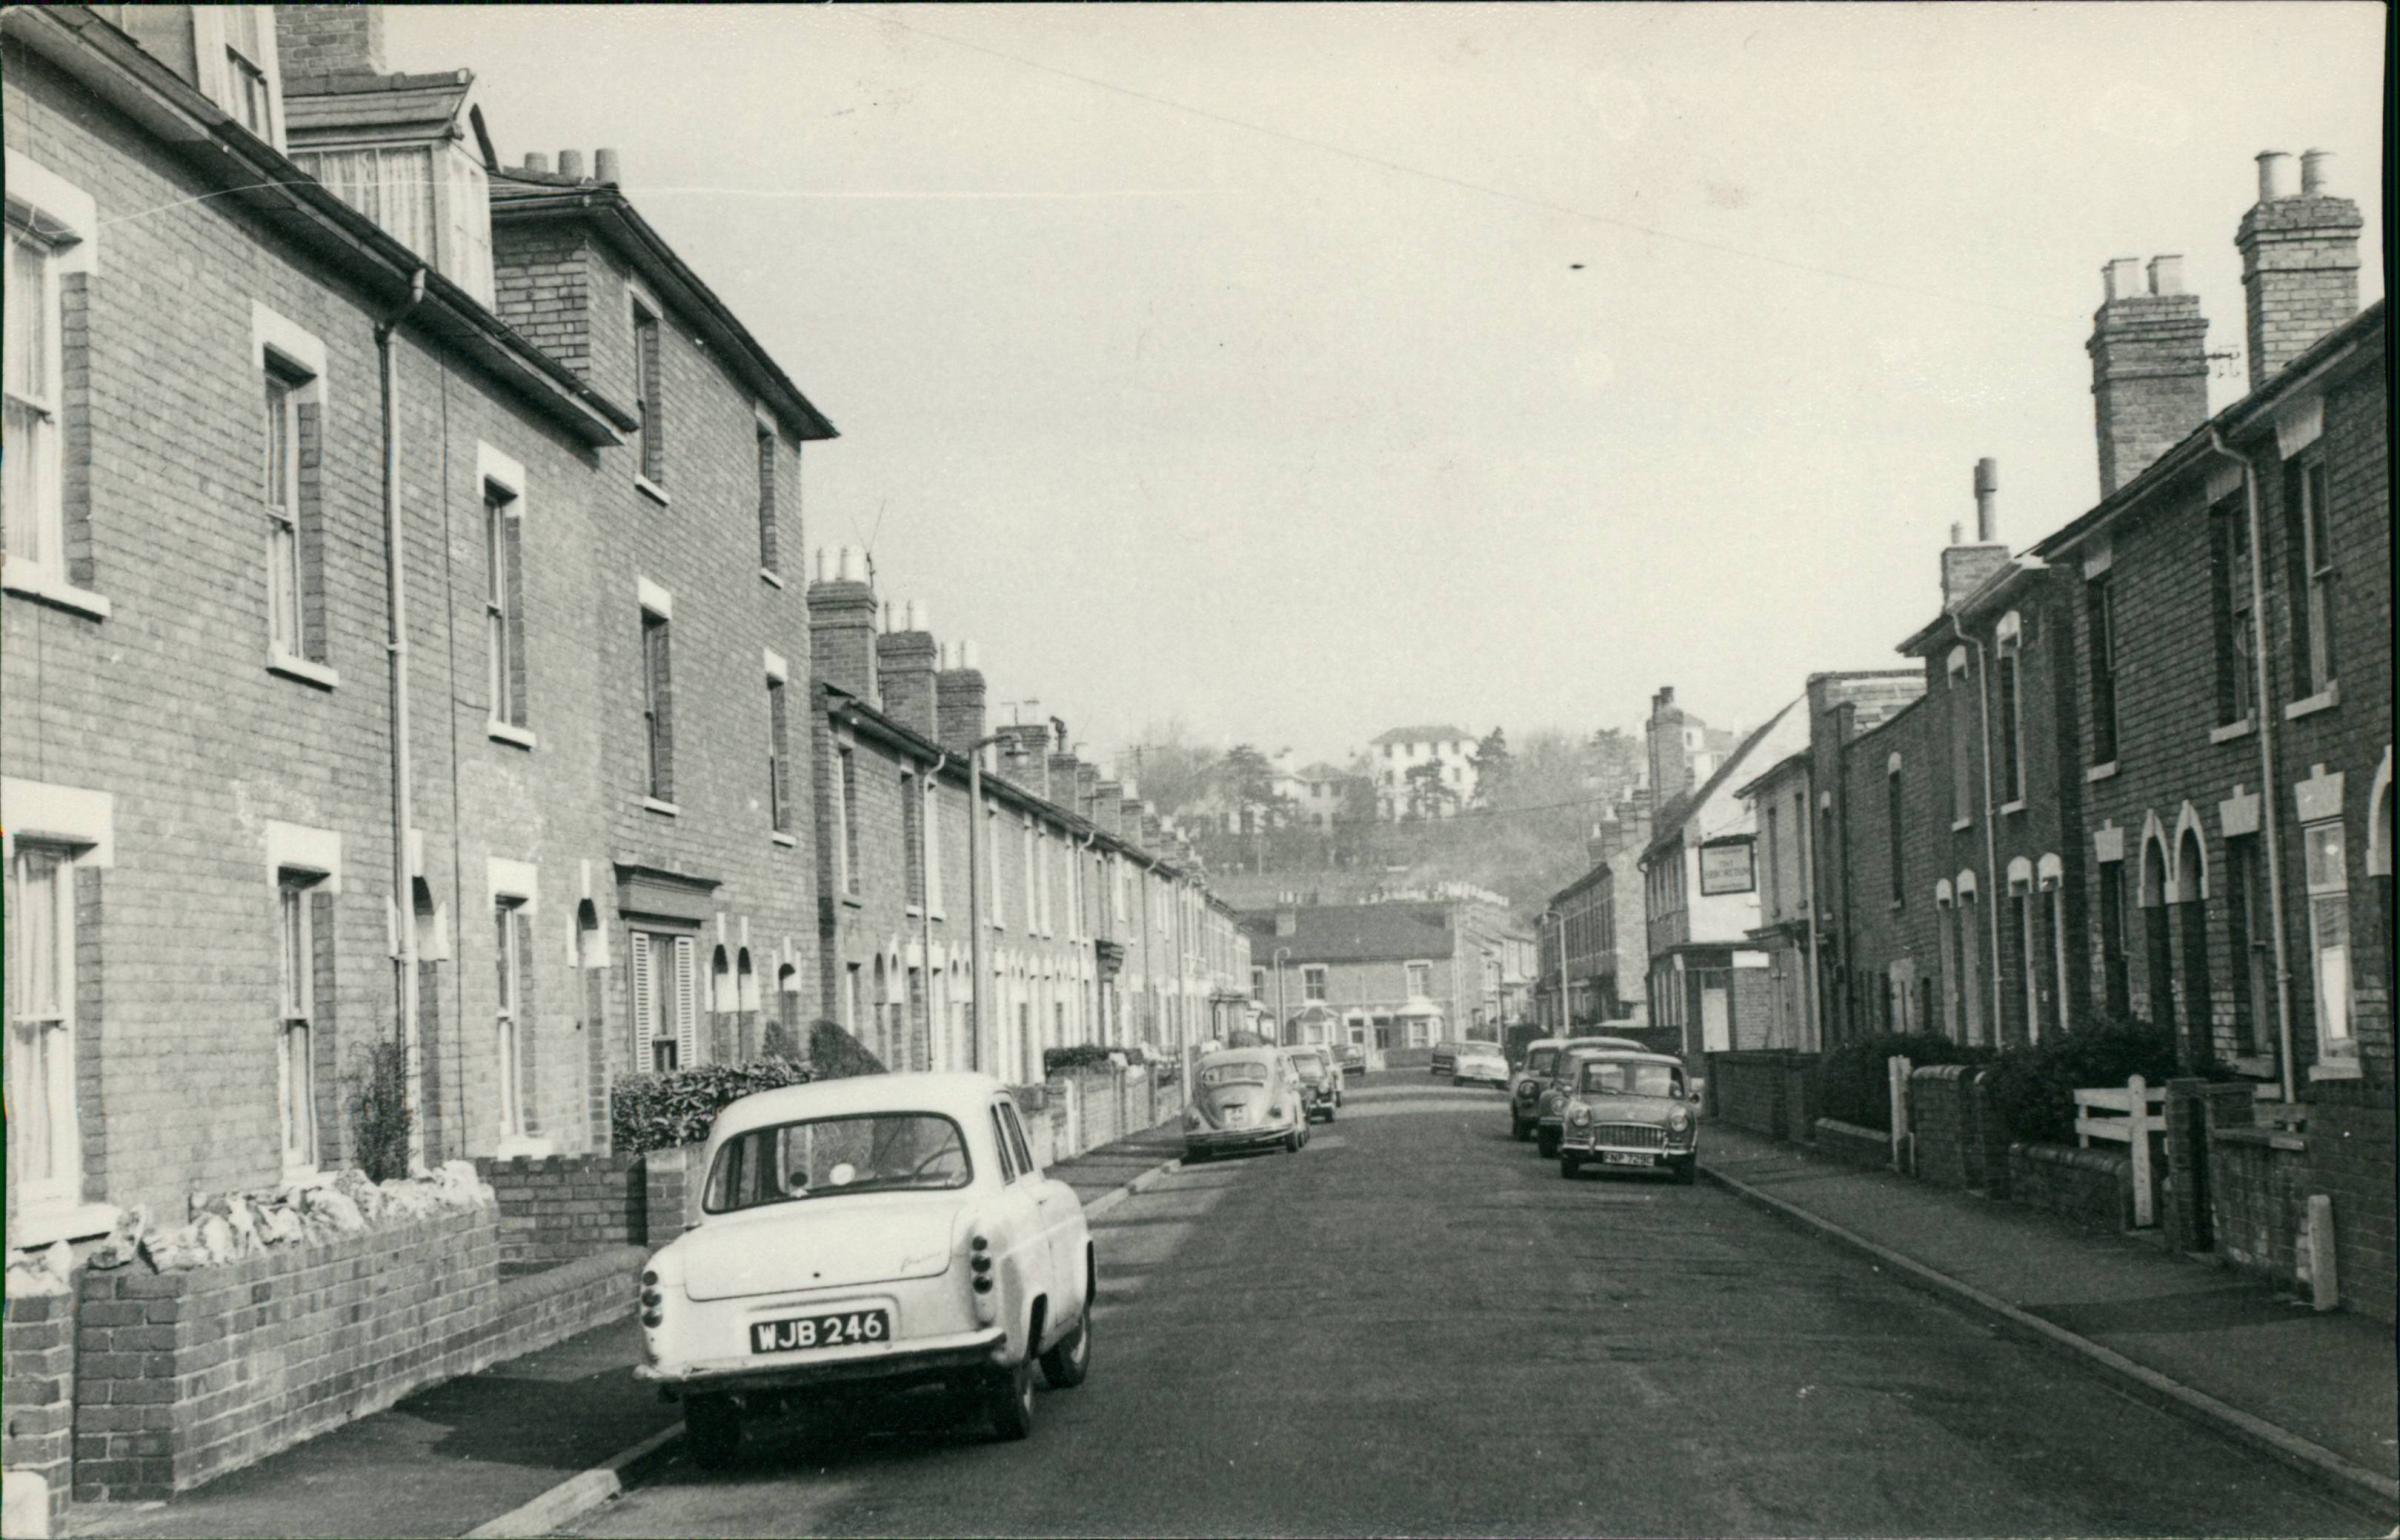 A view along Northfield Street in 1979. The large white Georgian buildings of Lansdowne Crescent can be seen in the distance